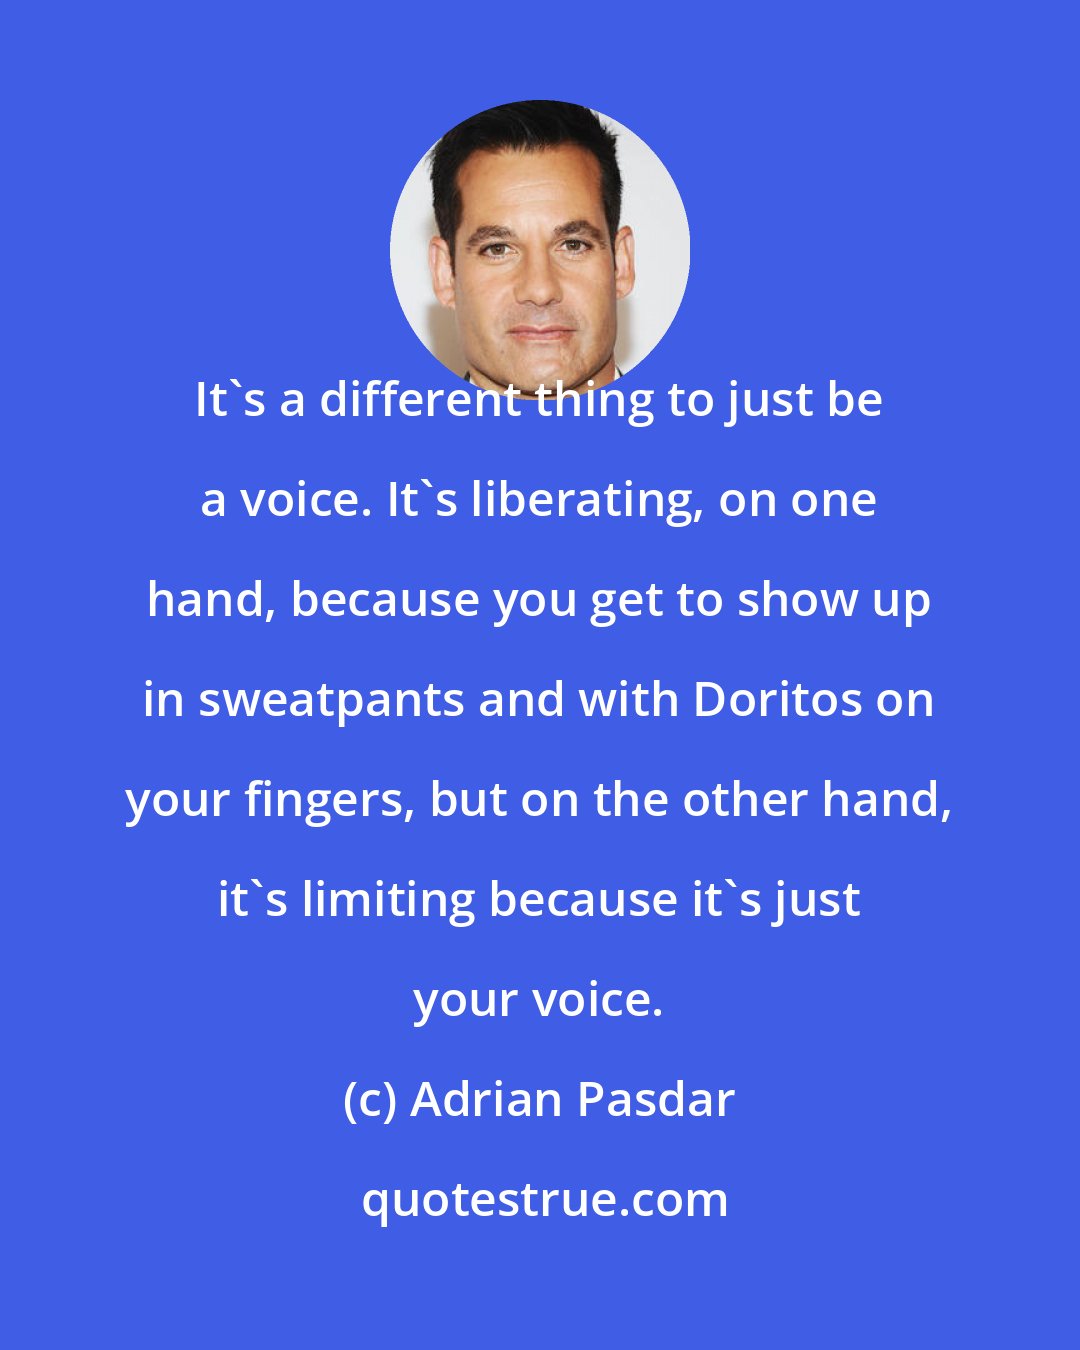 Adrian Pasdar: It's a different thing to just be a voice. It's liberating, on one hand, because you get to show up in sweatpants and with Doritos on your fingers, but on the other hand, it's limiting because it's just your voice.